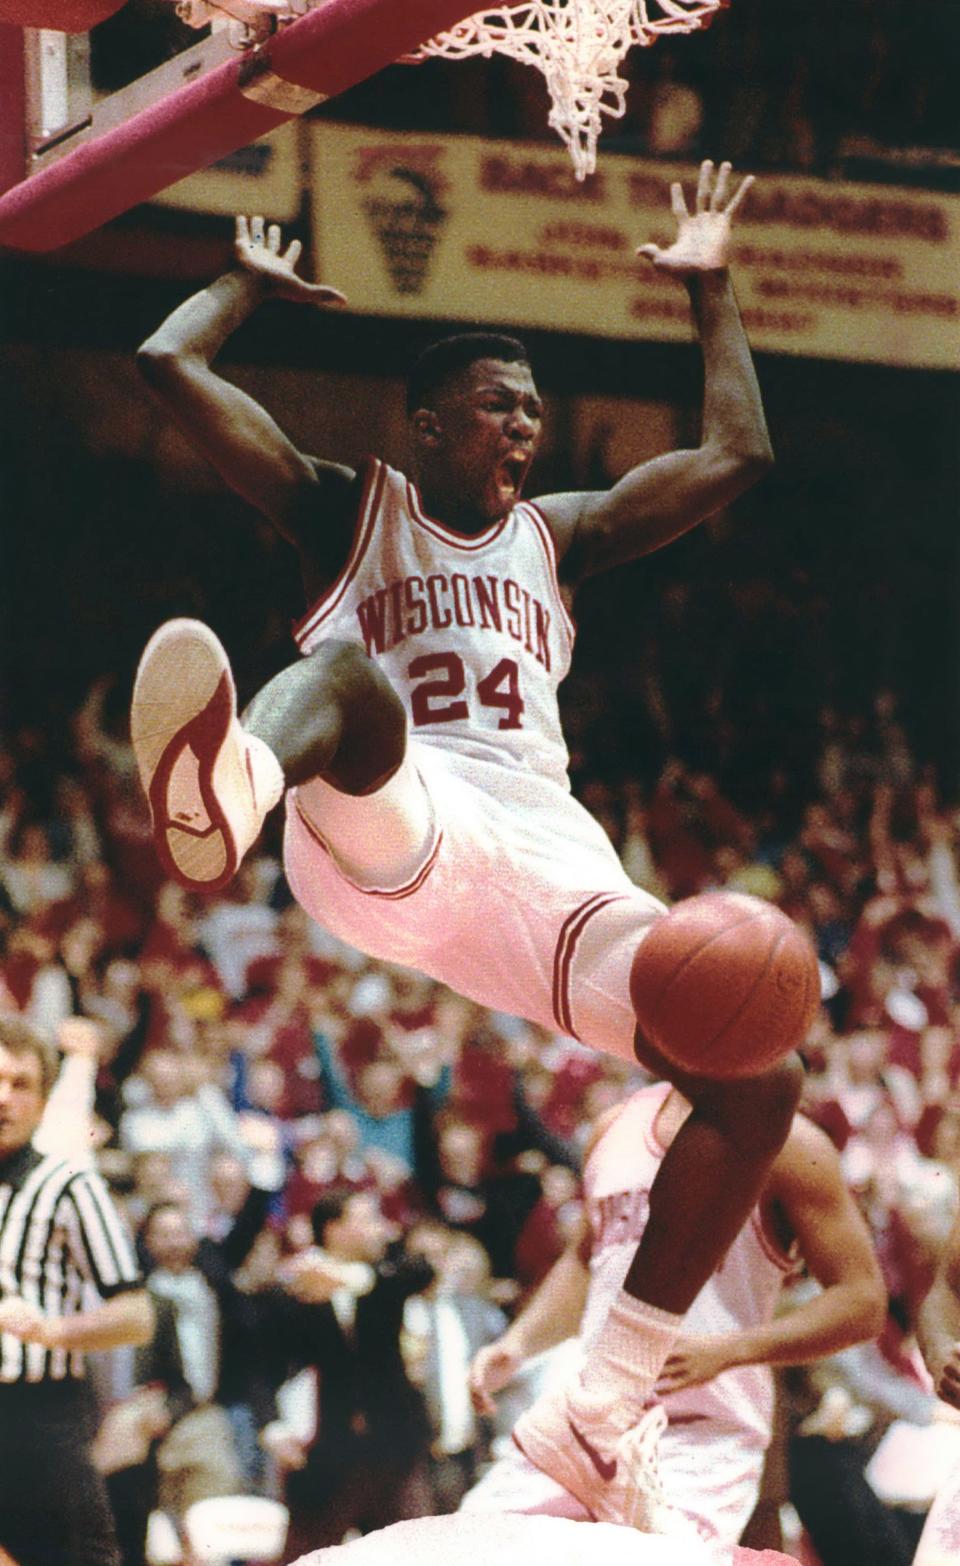 Michael Finley helped get the Badgers back to the NCAA Tournament for the first time in 47 years.